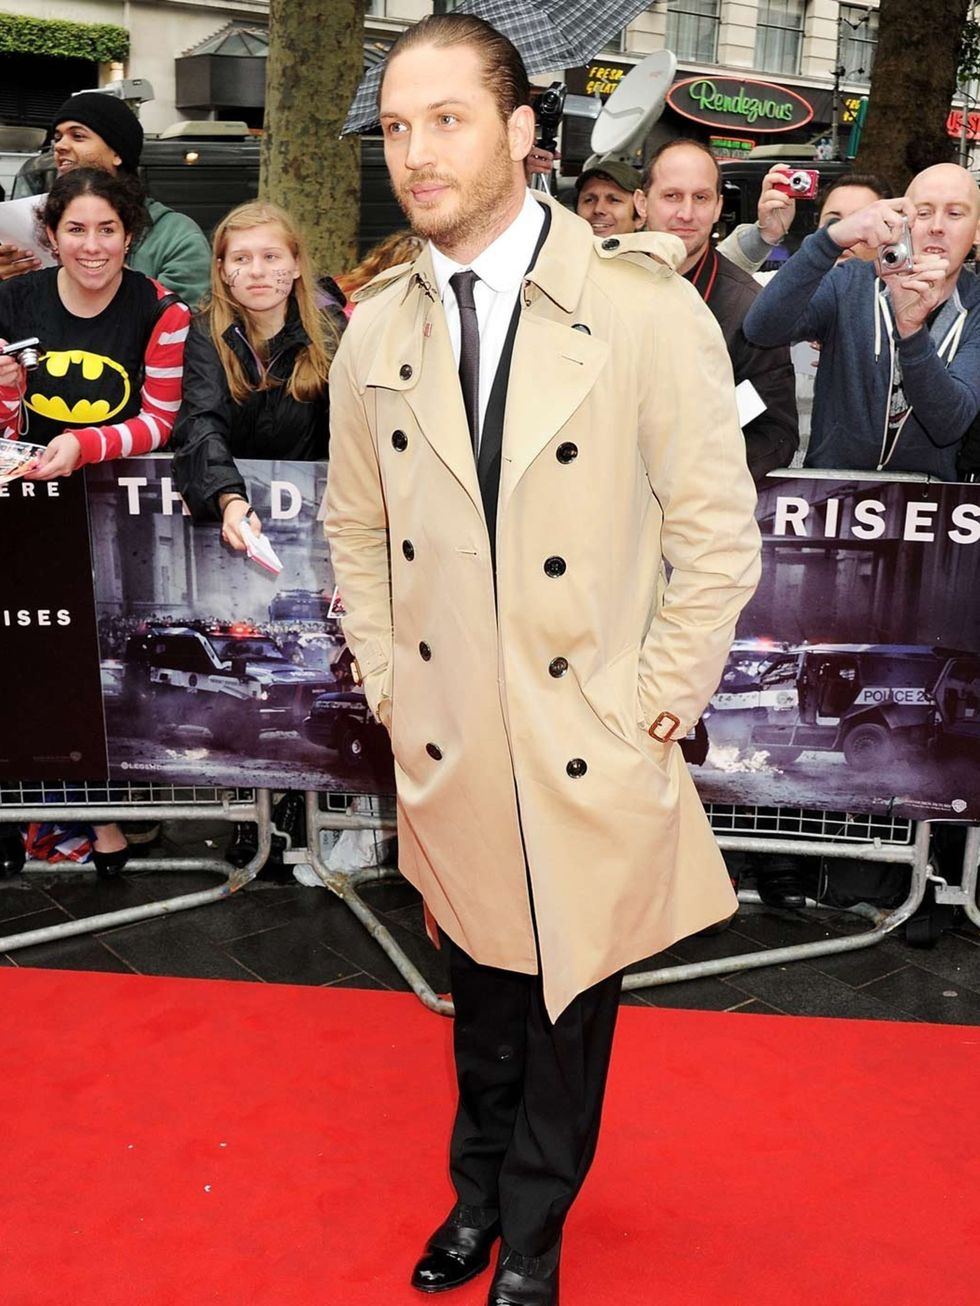 <p>Tom Hardy attends the European premiere of The Dark Knight Rises in Londons Leicester Square. He plays Bane in the film. Batmans most fearsome adversary.</p>